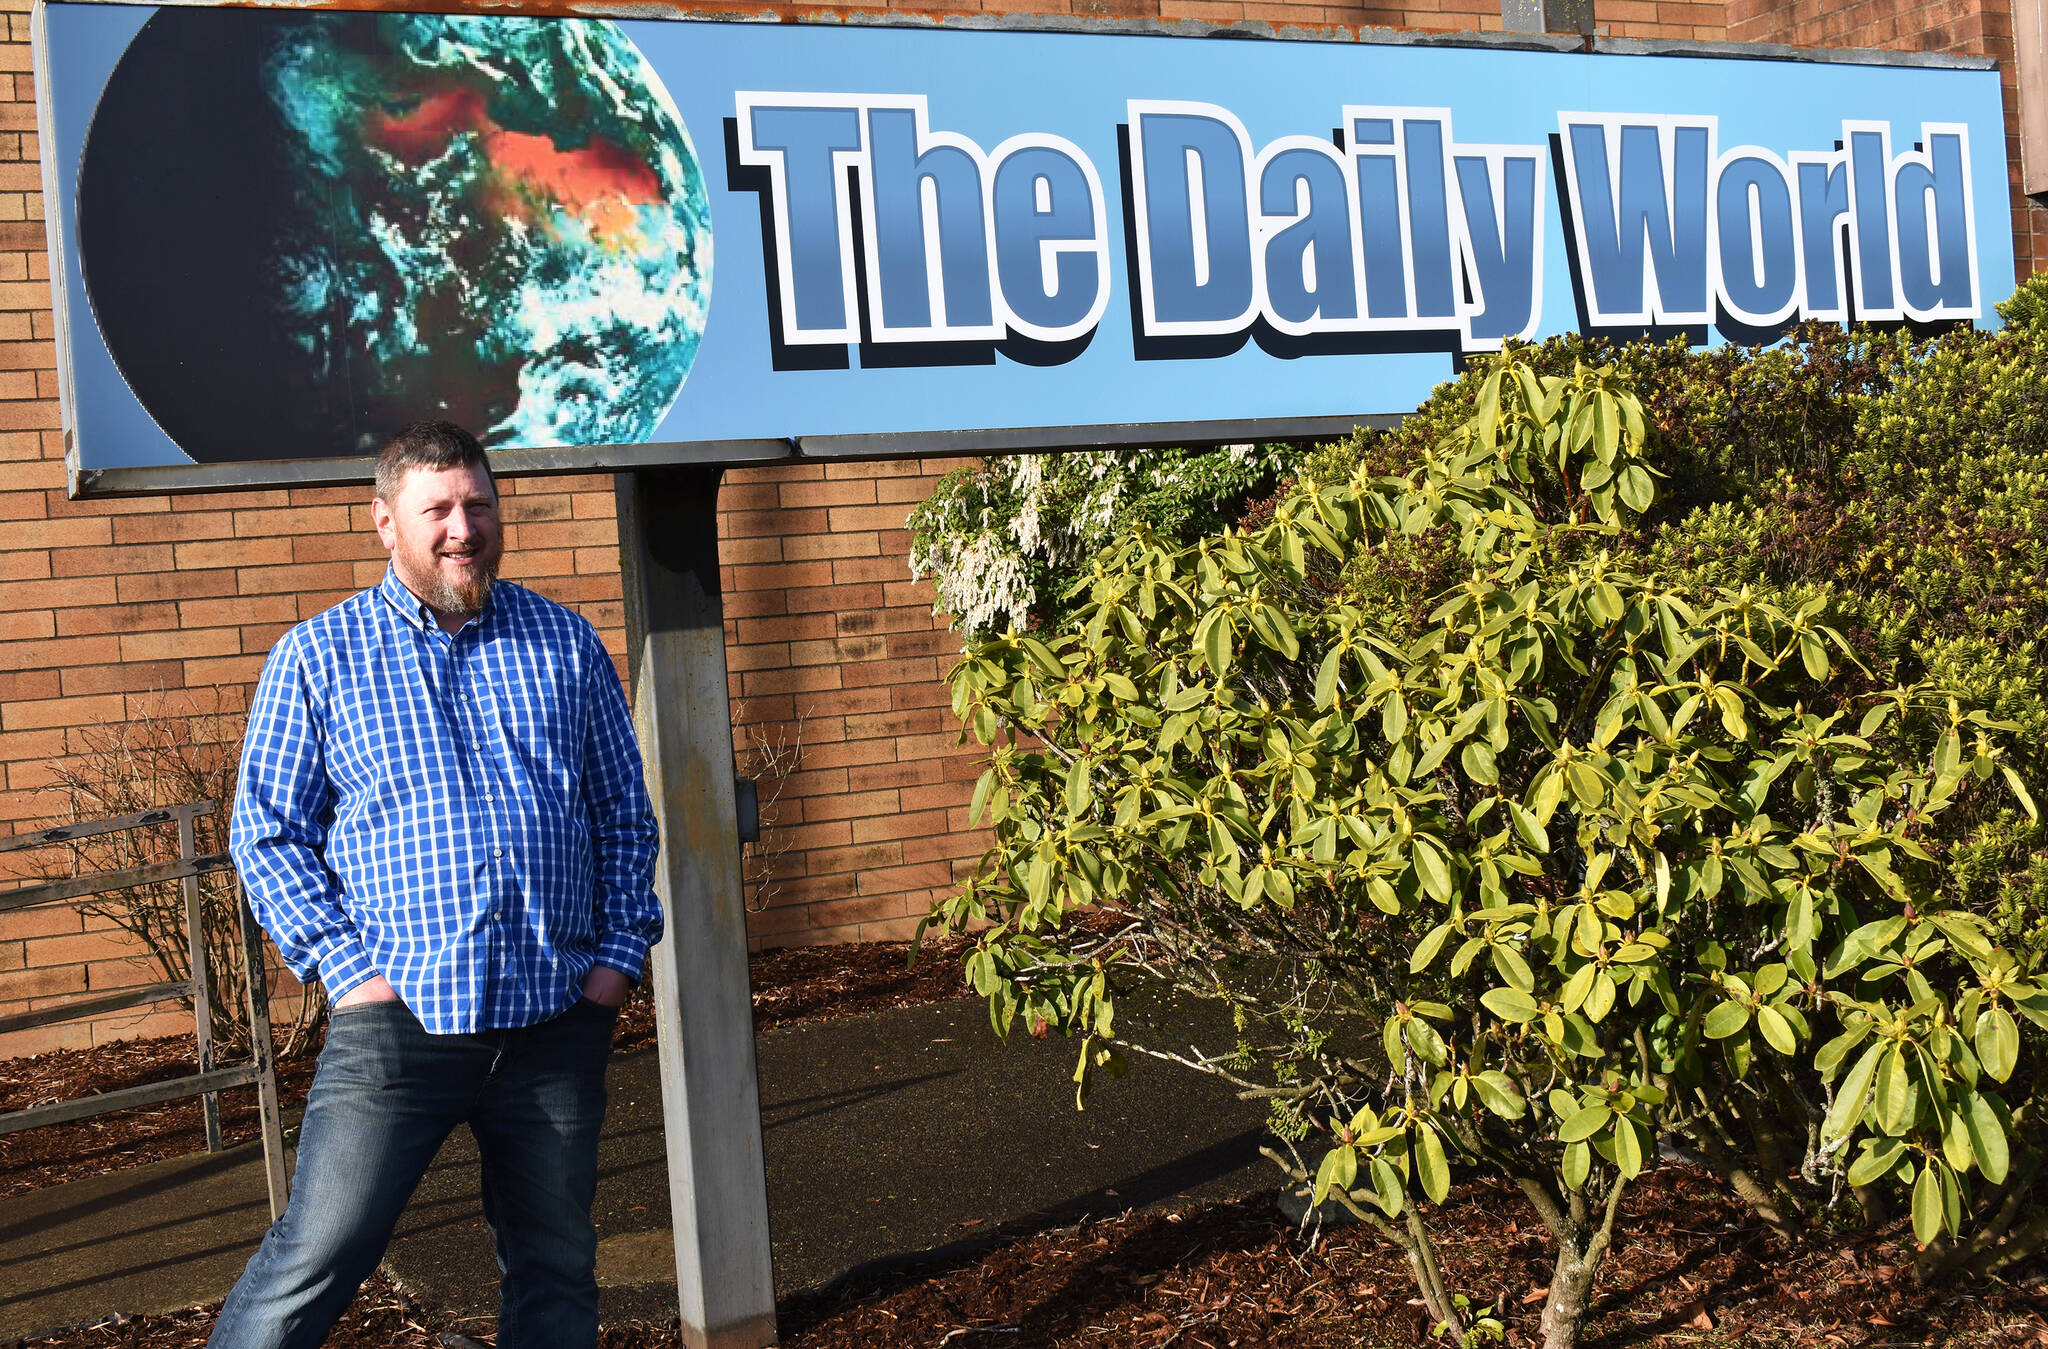 Matthew N. Wells / The Daily World
Terry Ward, the publisher for The Daily World, announced Wednesday morning that Doug Ames — pictured — is the newspaper’s new interim general sales manager. Ames stands in front of The Daily World sign that he himself installed a couple months ago.